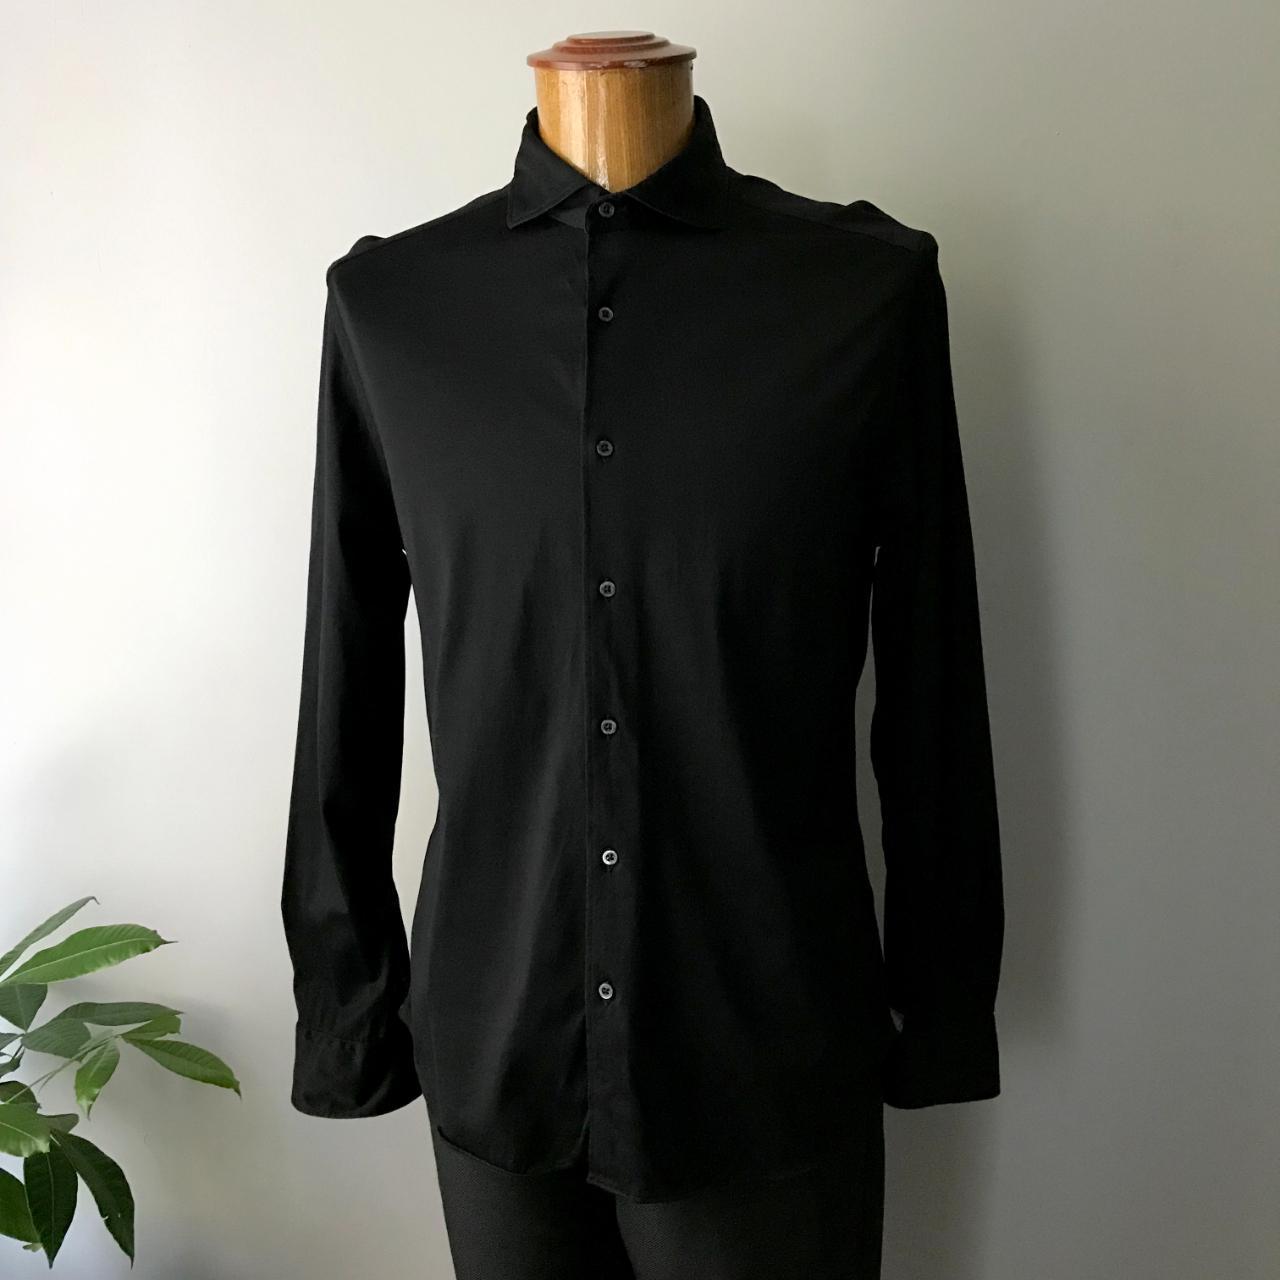 Product Image 1 - Modern black dress shirt with